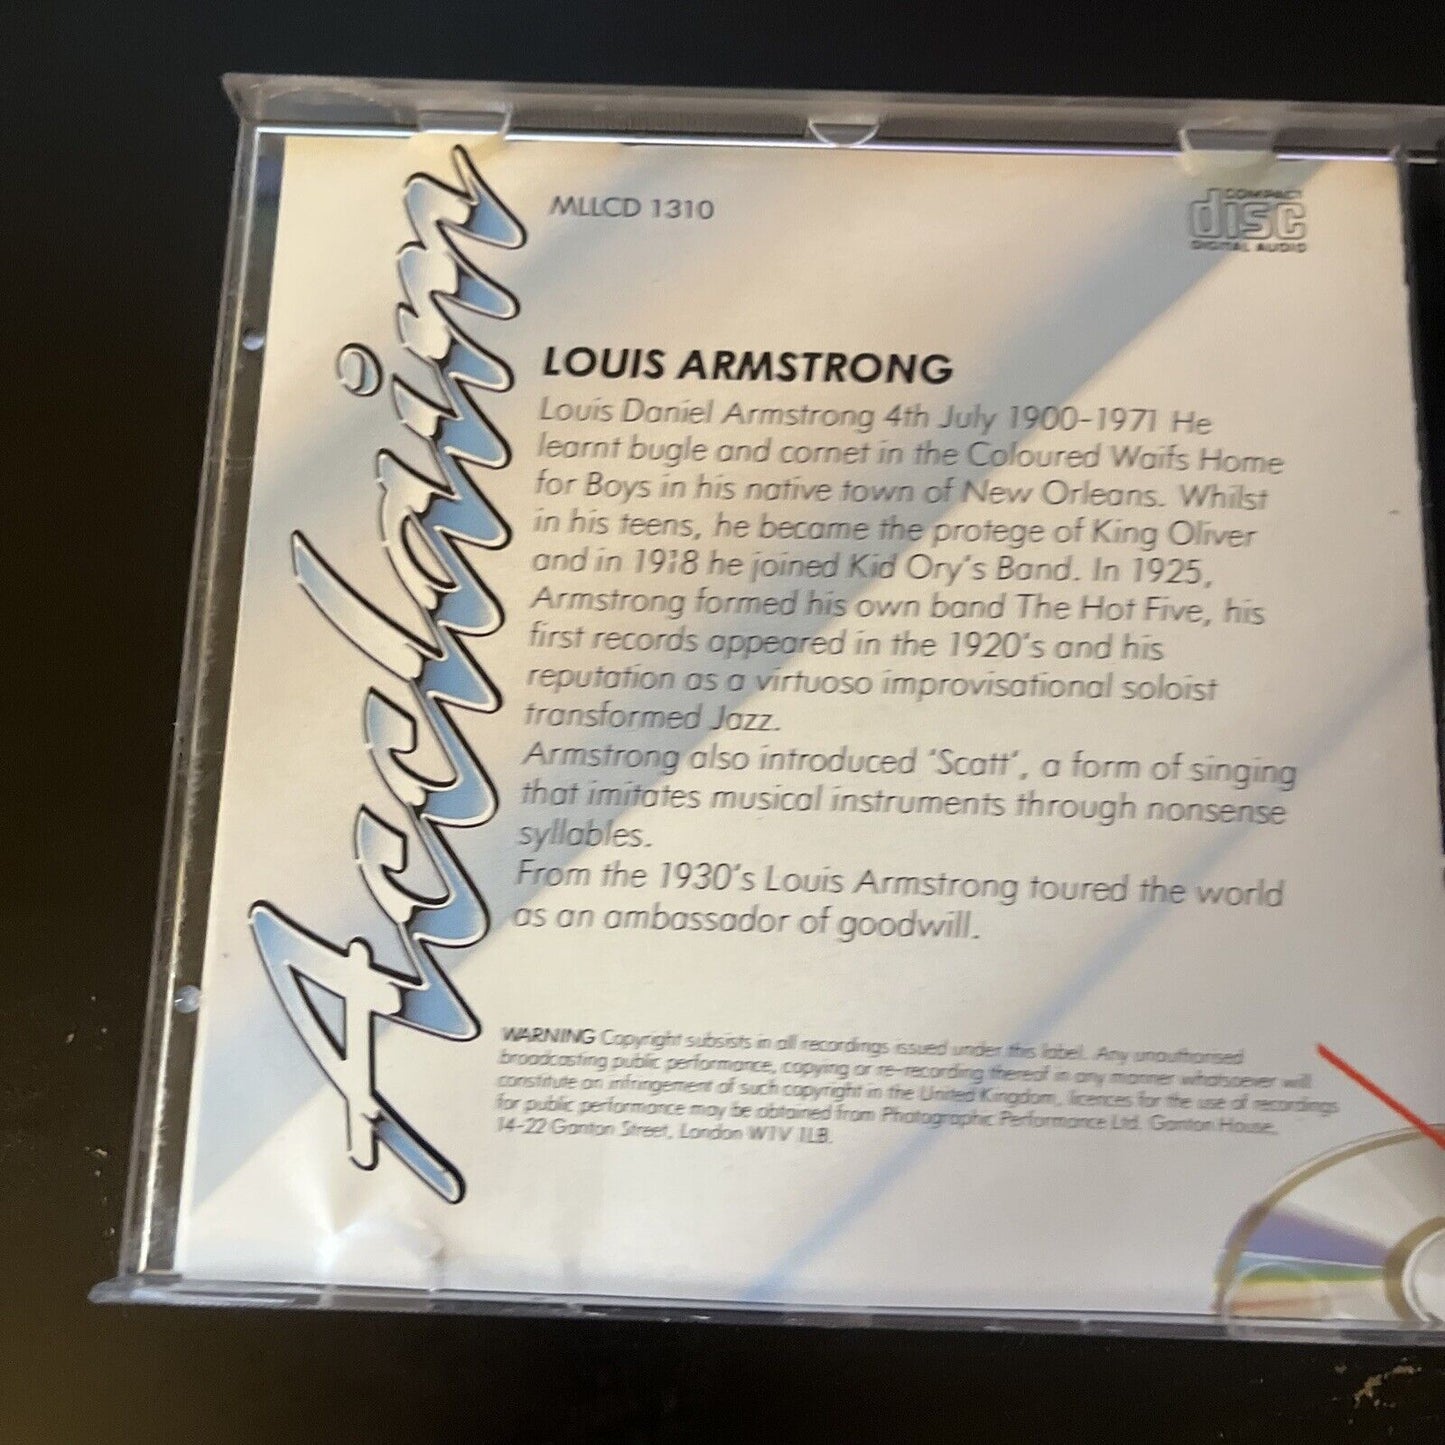 Louis Armstrong - Greatest Hits (CD)